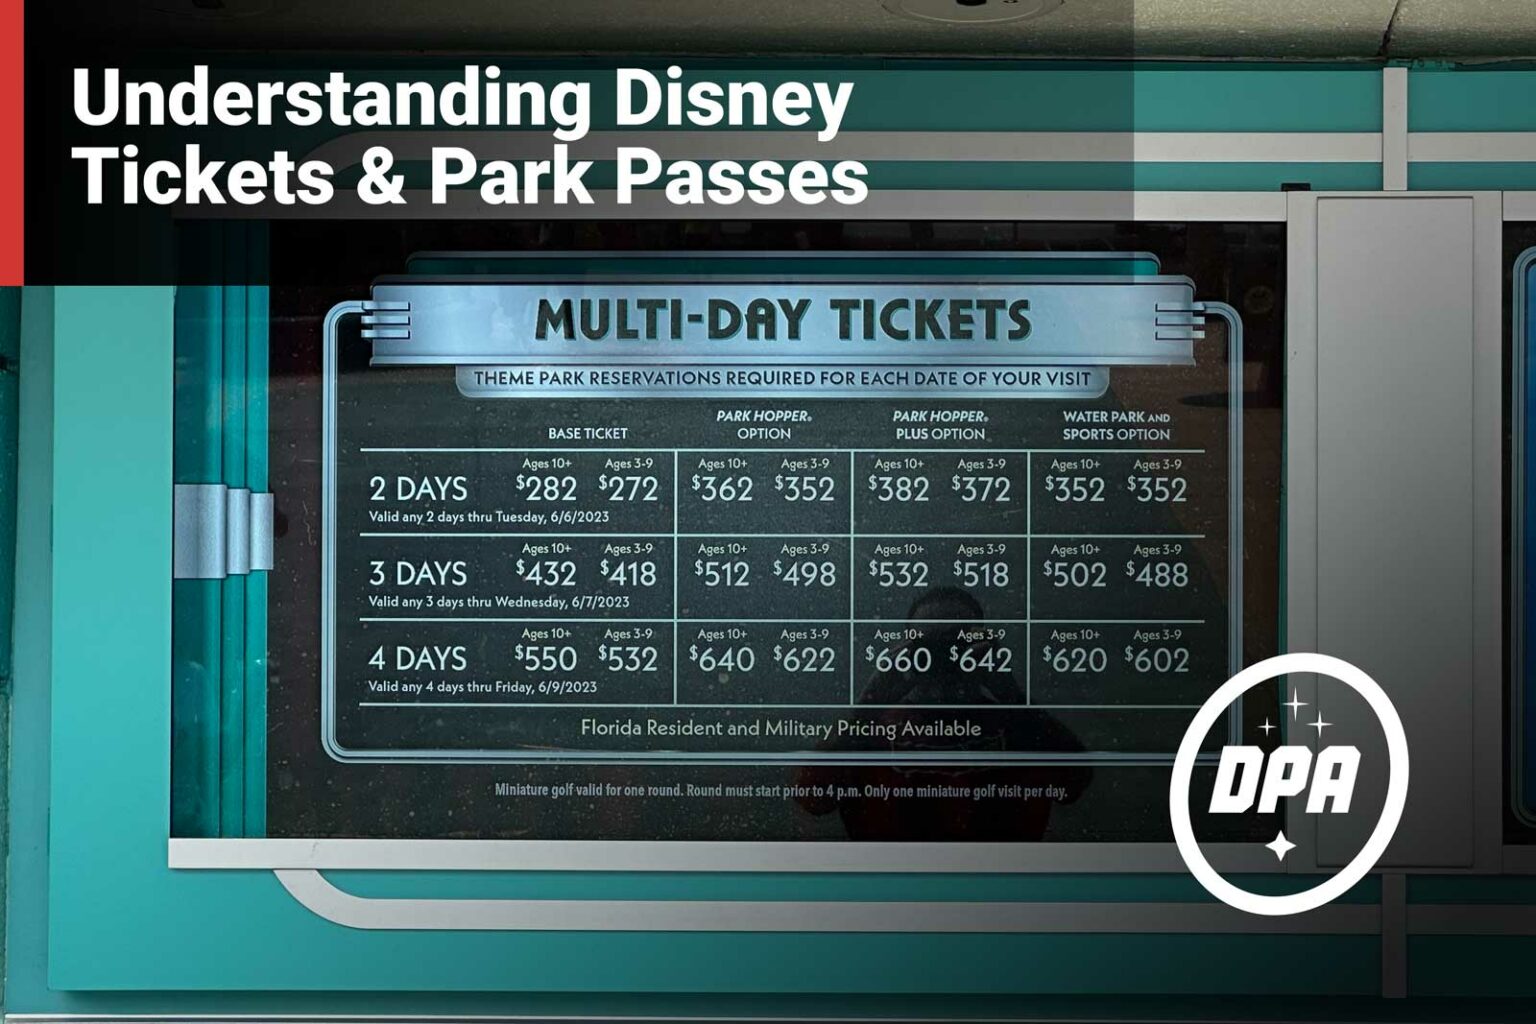 Understanding the different tickets & park passes at Disney World